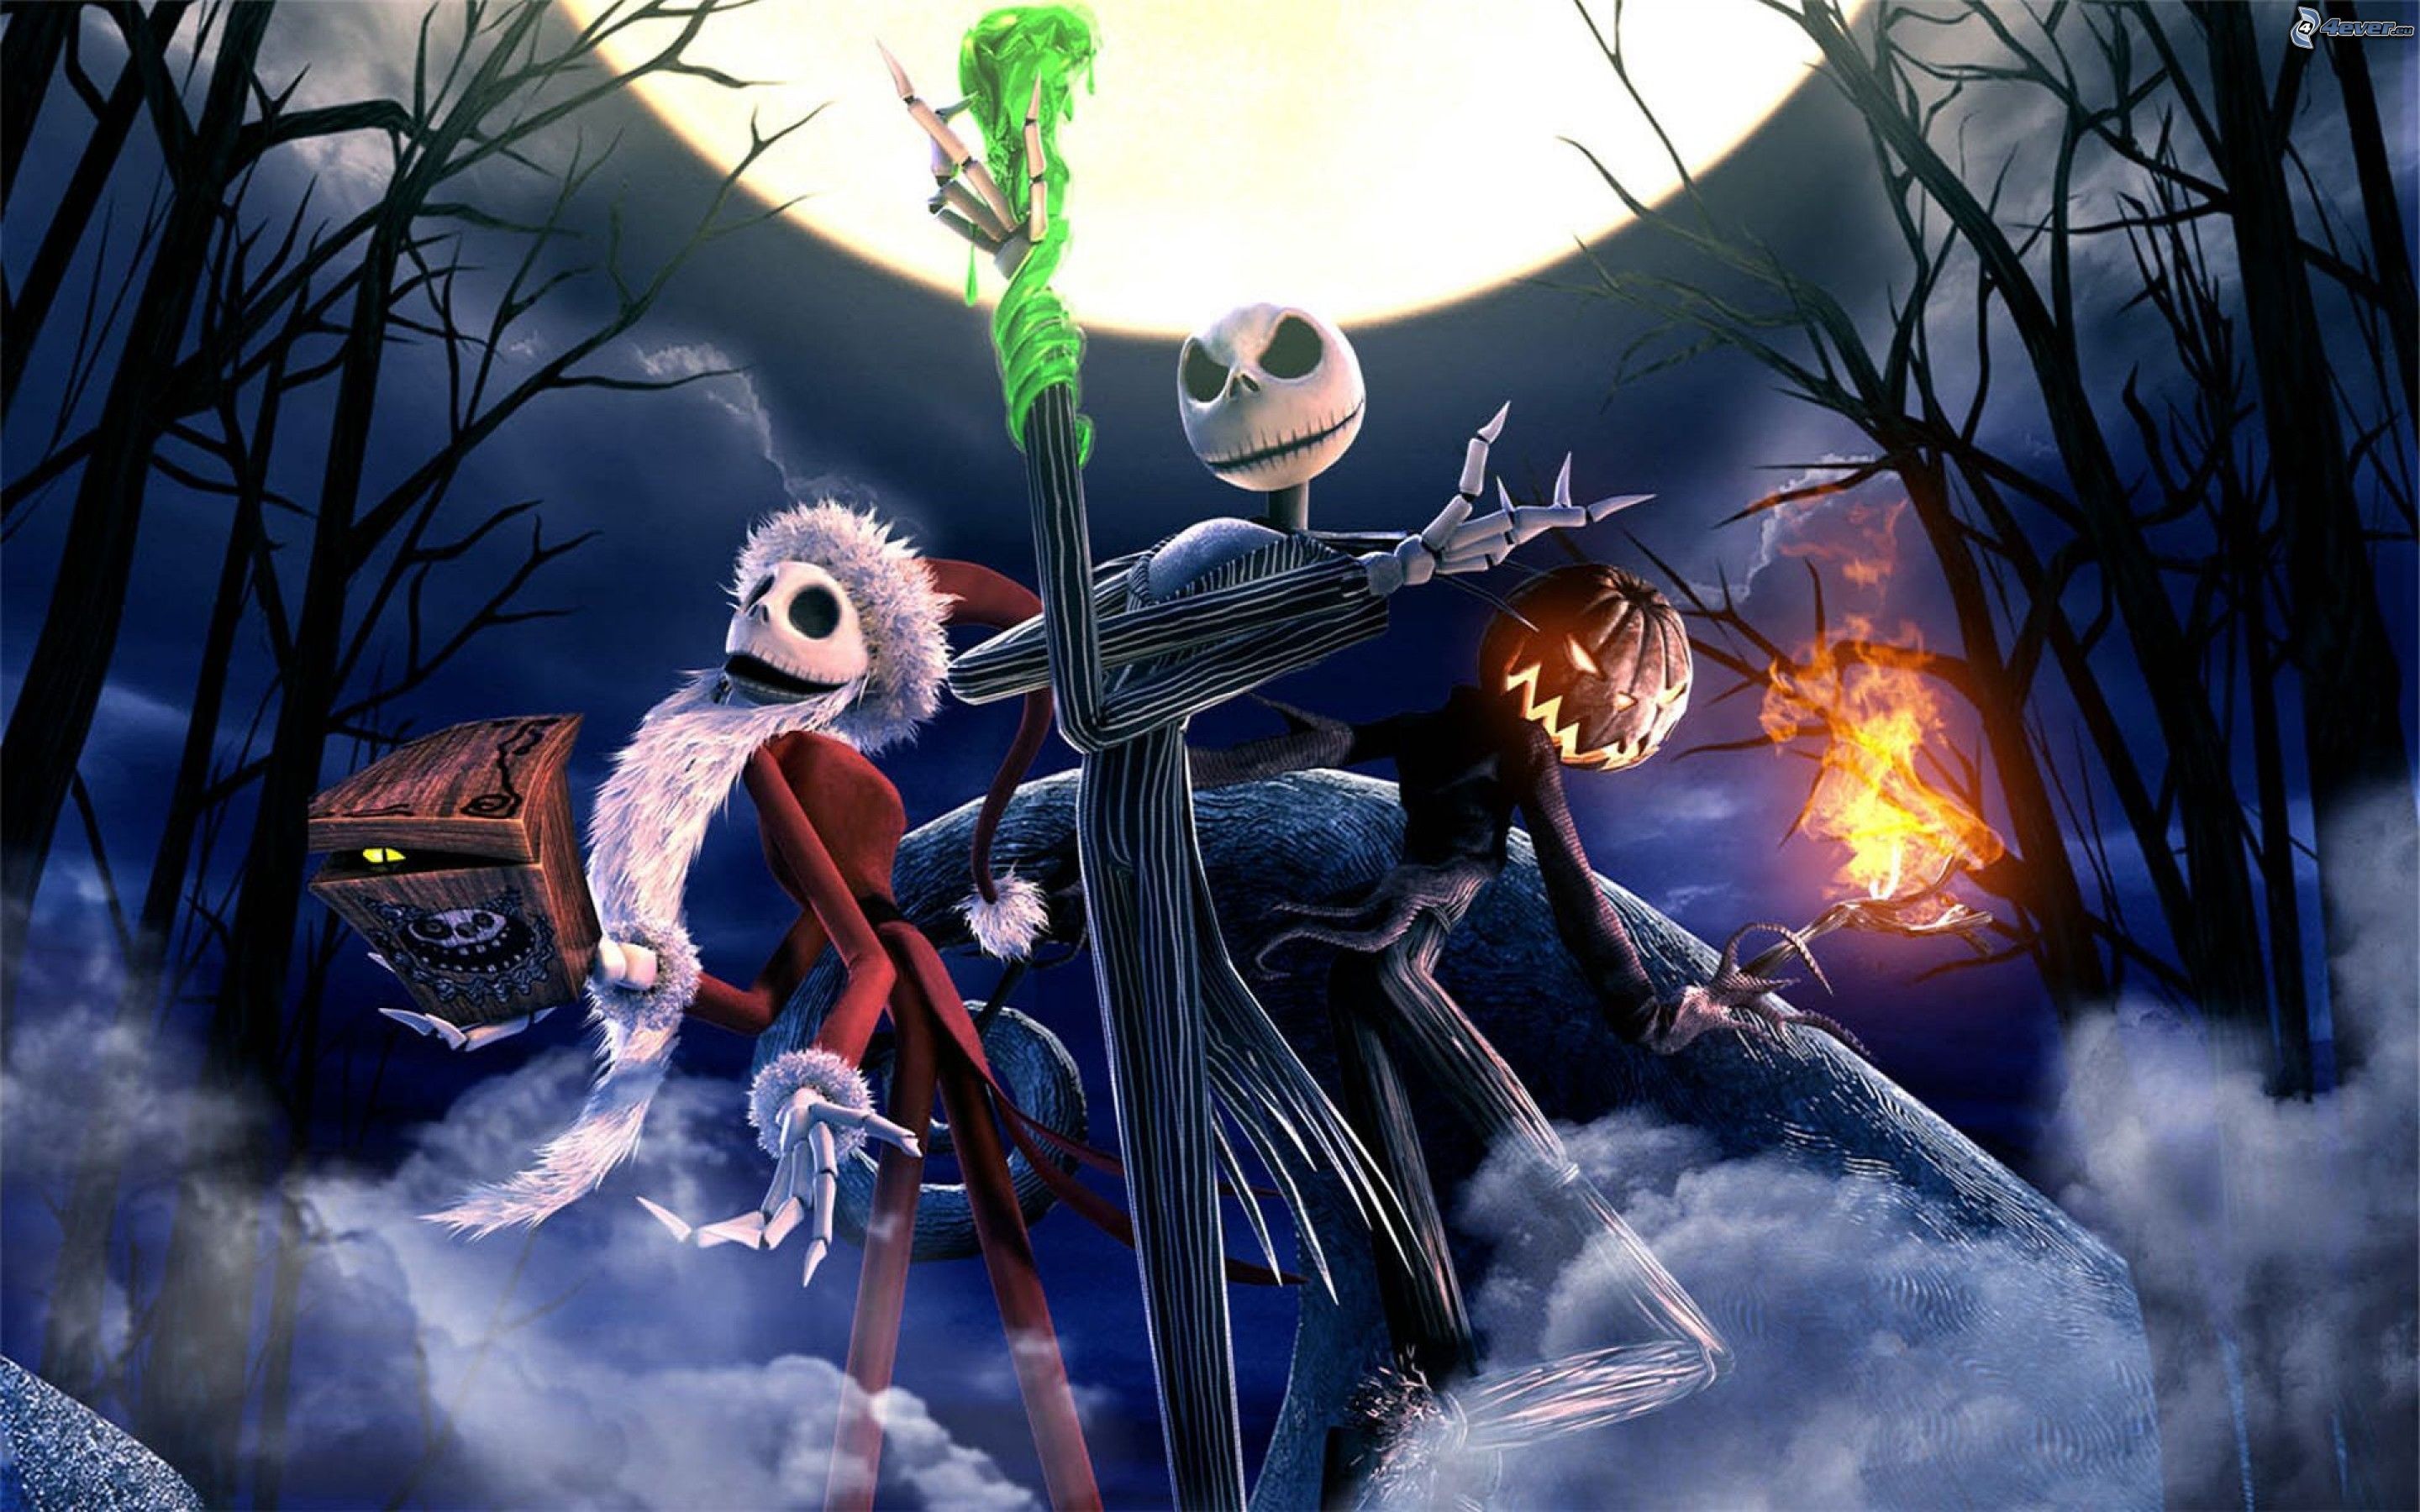 The Nightmare Before Christmas 15 Fun Facts!. Nightmare before christmas wallpaper, Nightmare before christmas, Nightmare before christmas skeleton